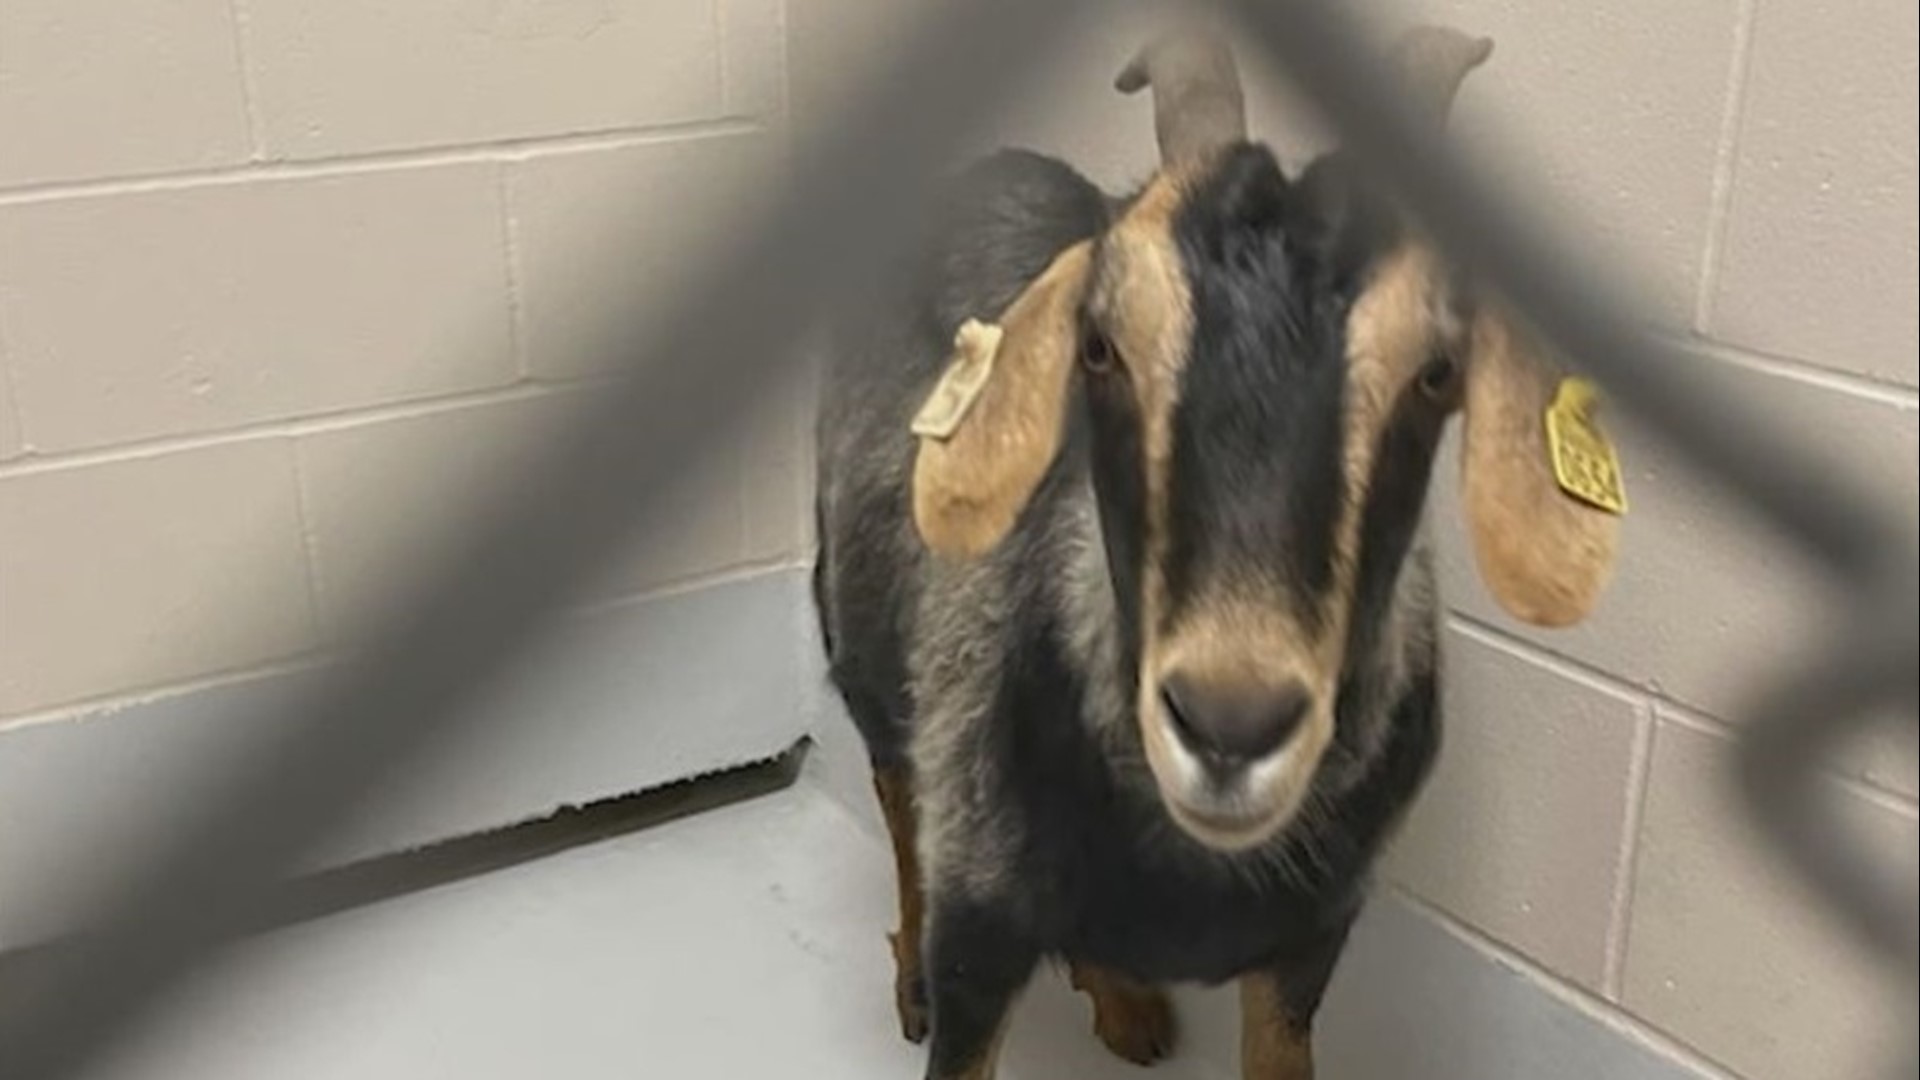 Deputy Tyler Heiden displayed some serious cowboy skills on Sunday, making a lasso from some borrowed rope and using it to capture a fugitive goat.